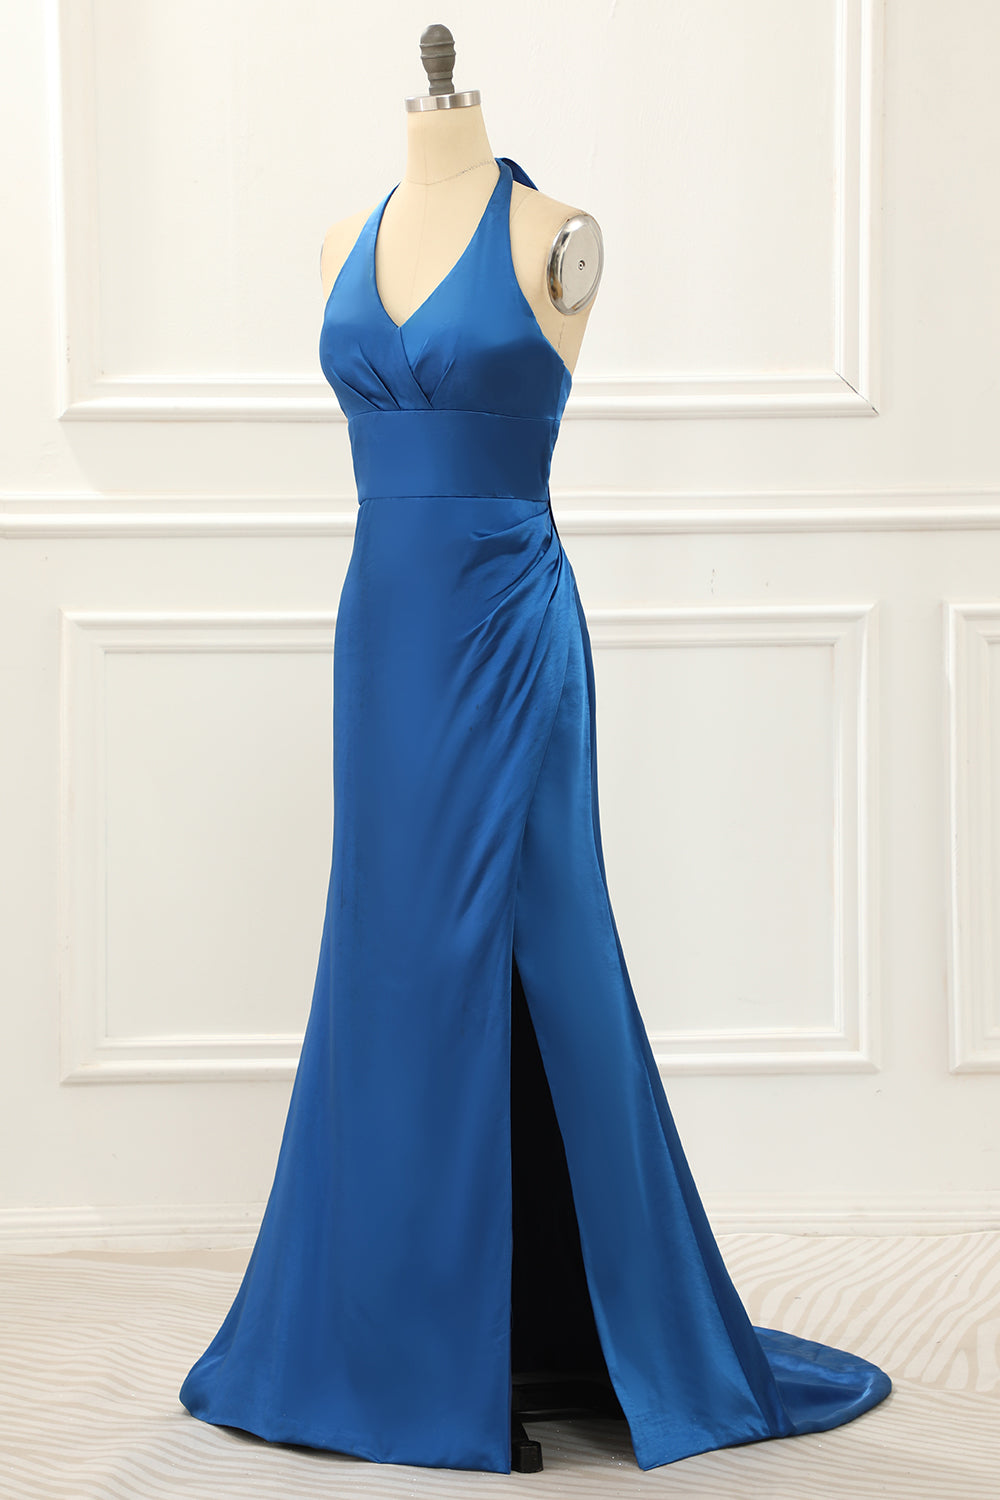 Party Dress Satin, Royal Blue Halter Simple Prom Dress with Slit